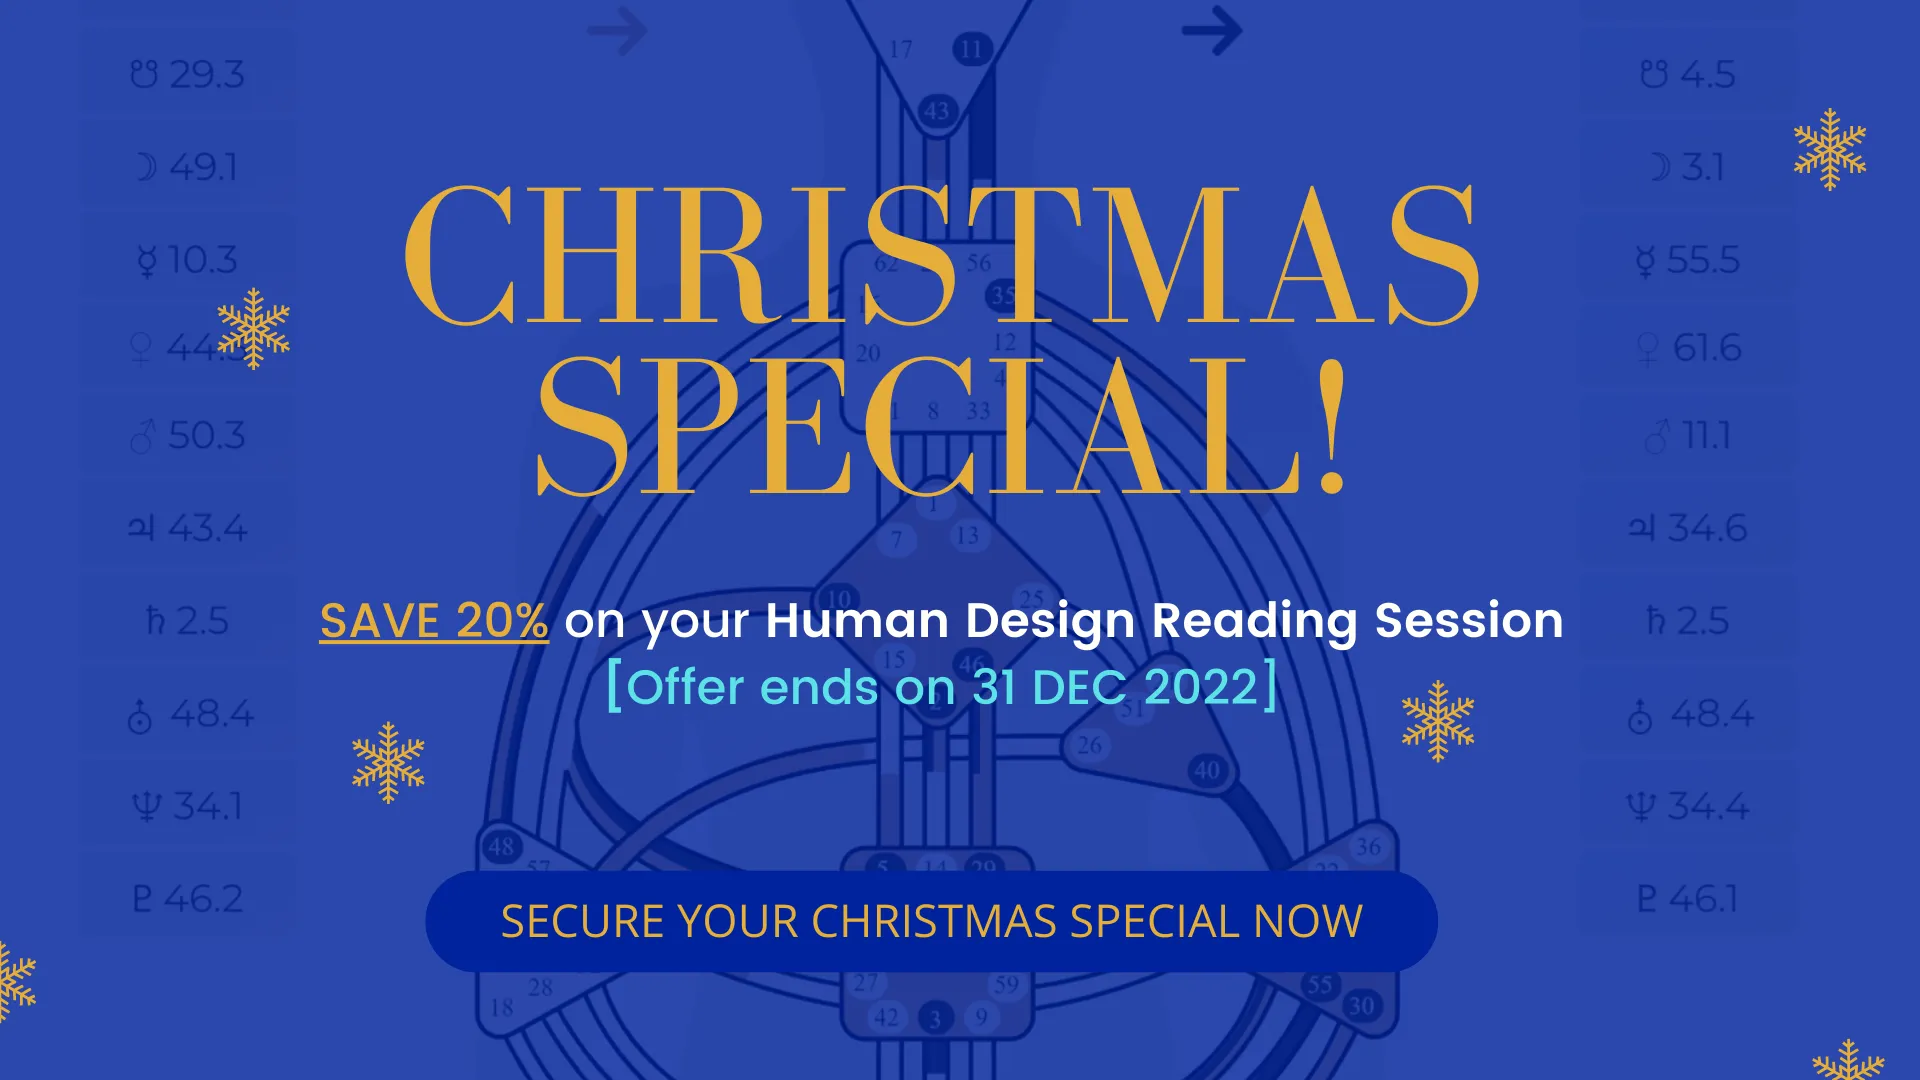 HD reading Christmas Offer